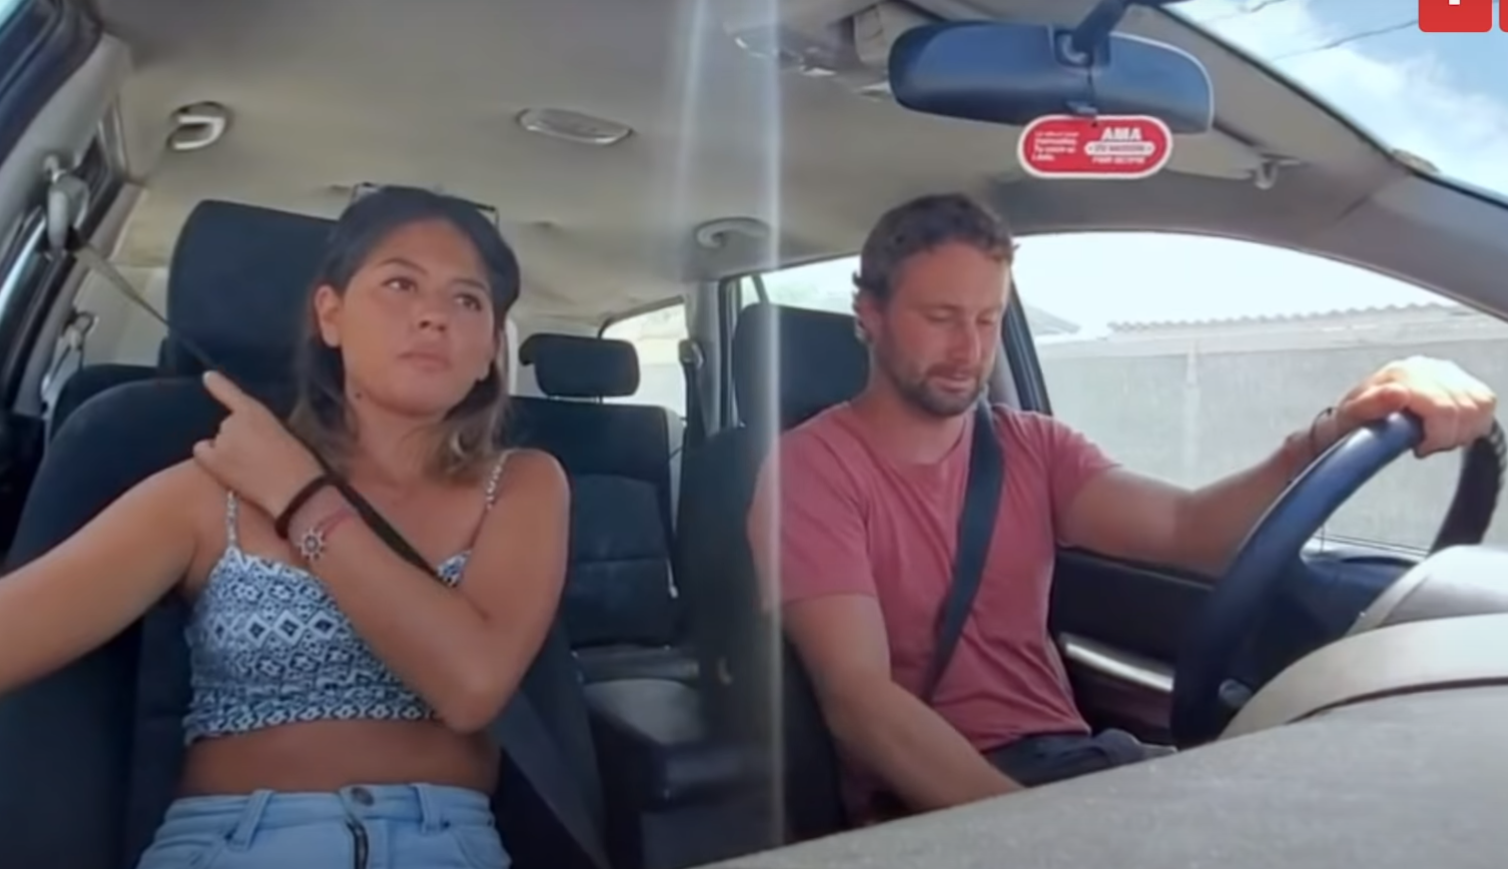 90 Day Fiancé couple Corey and Evelin in a car, with Corey Rathgeber at the wheel